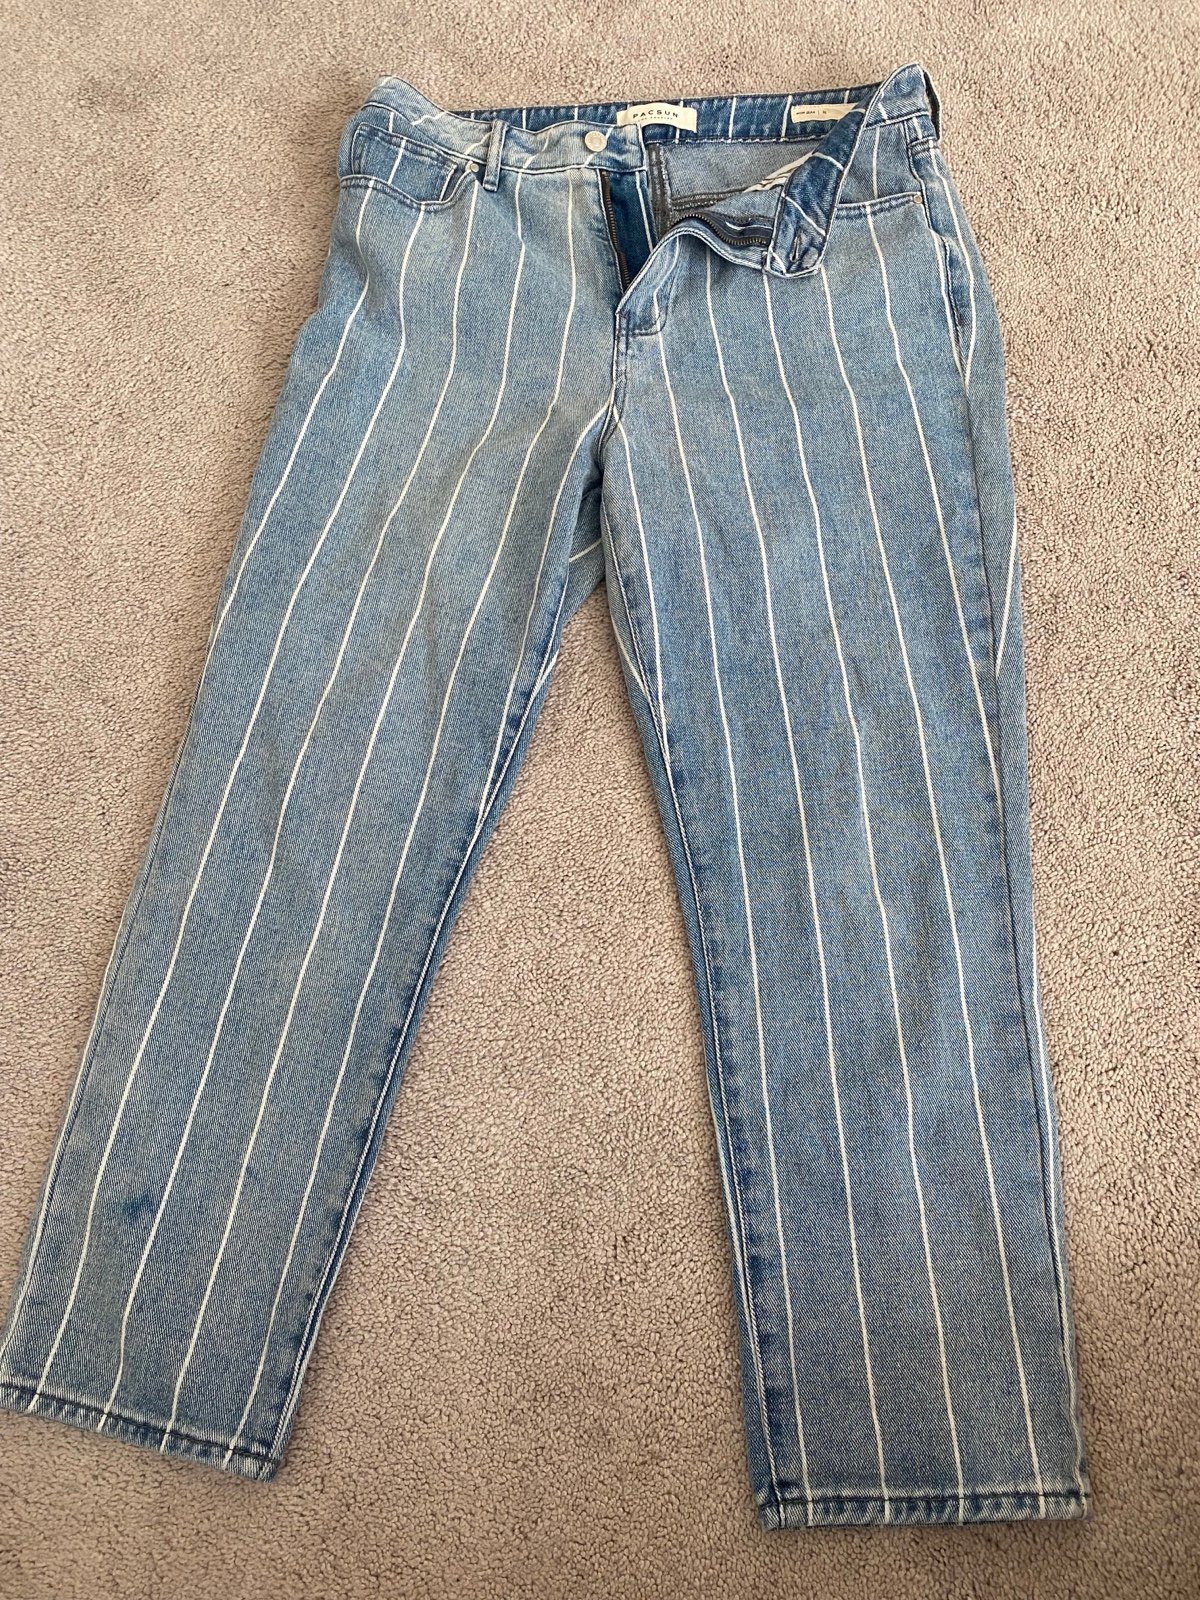 Special offer  Pacsun Mom Jeans fXzc6cXeR Cool